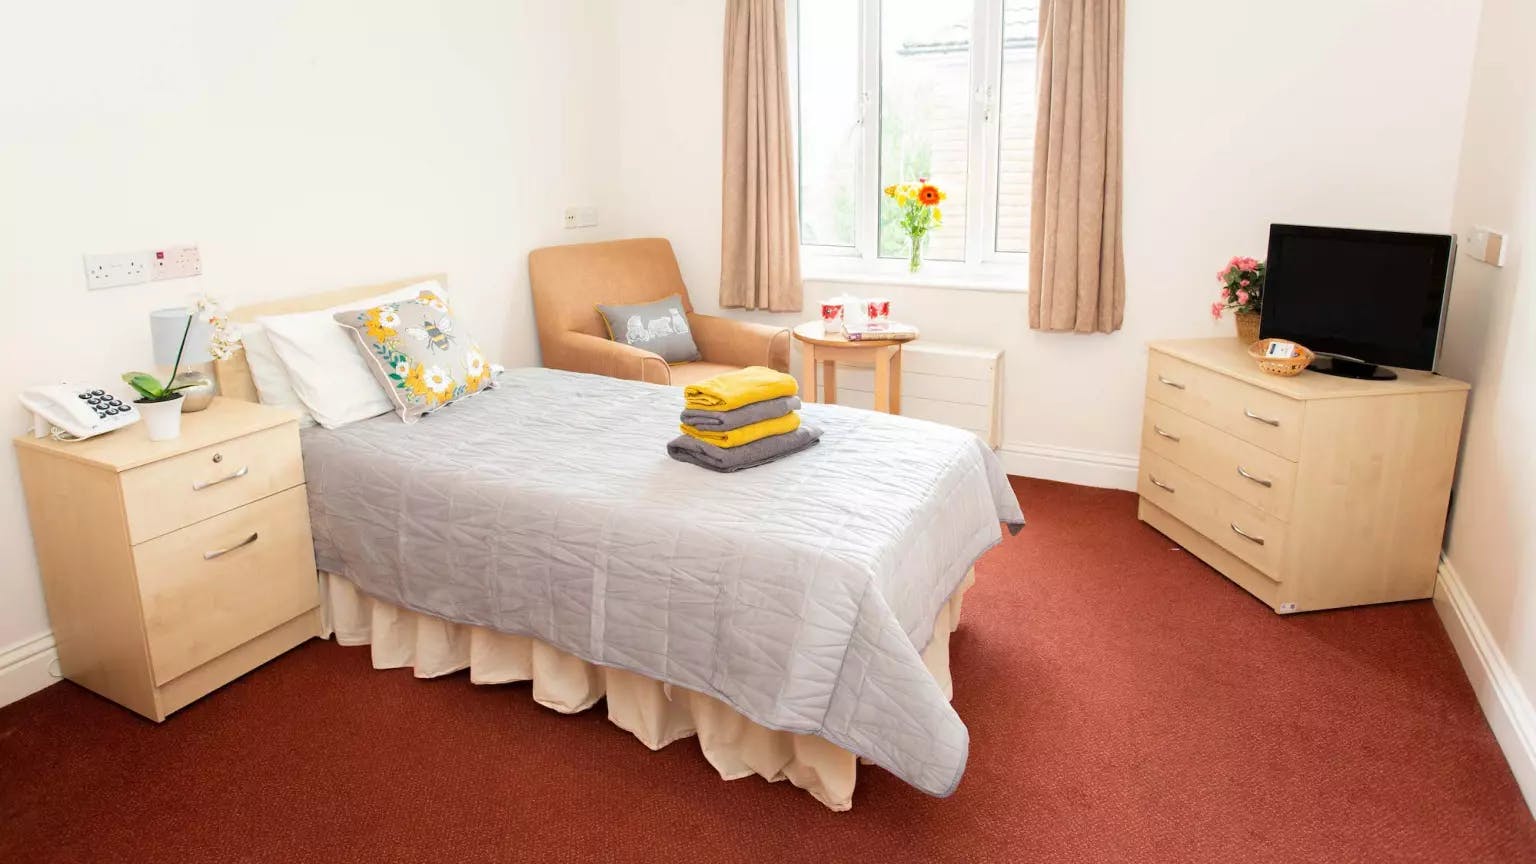 Bedroom of The Mead care home in Borehamwood, Hertfordshire